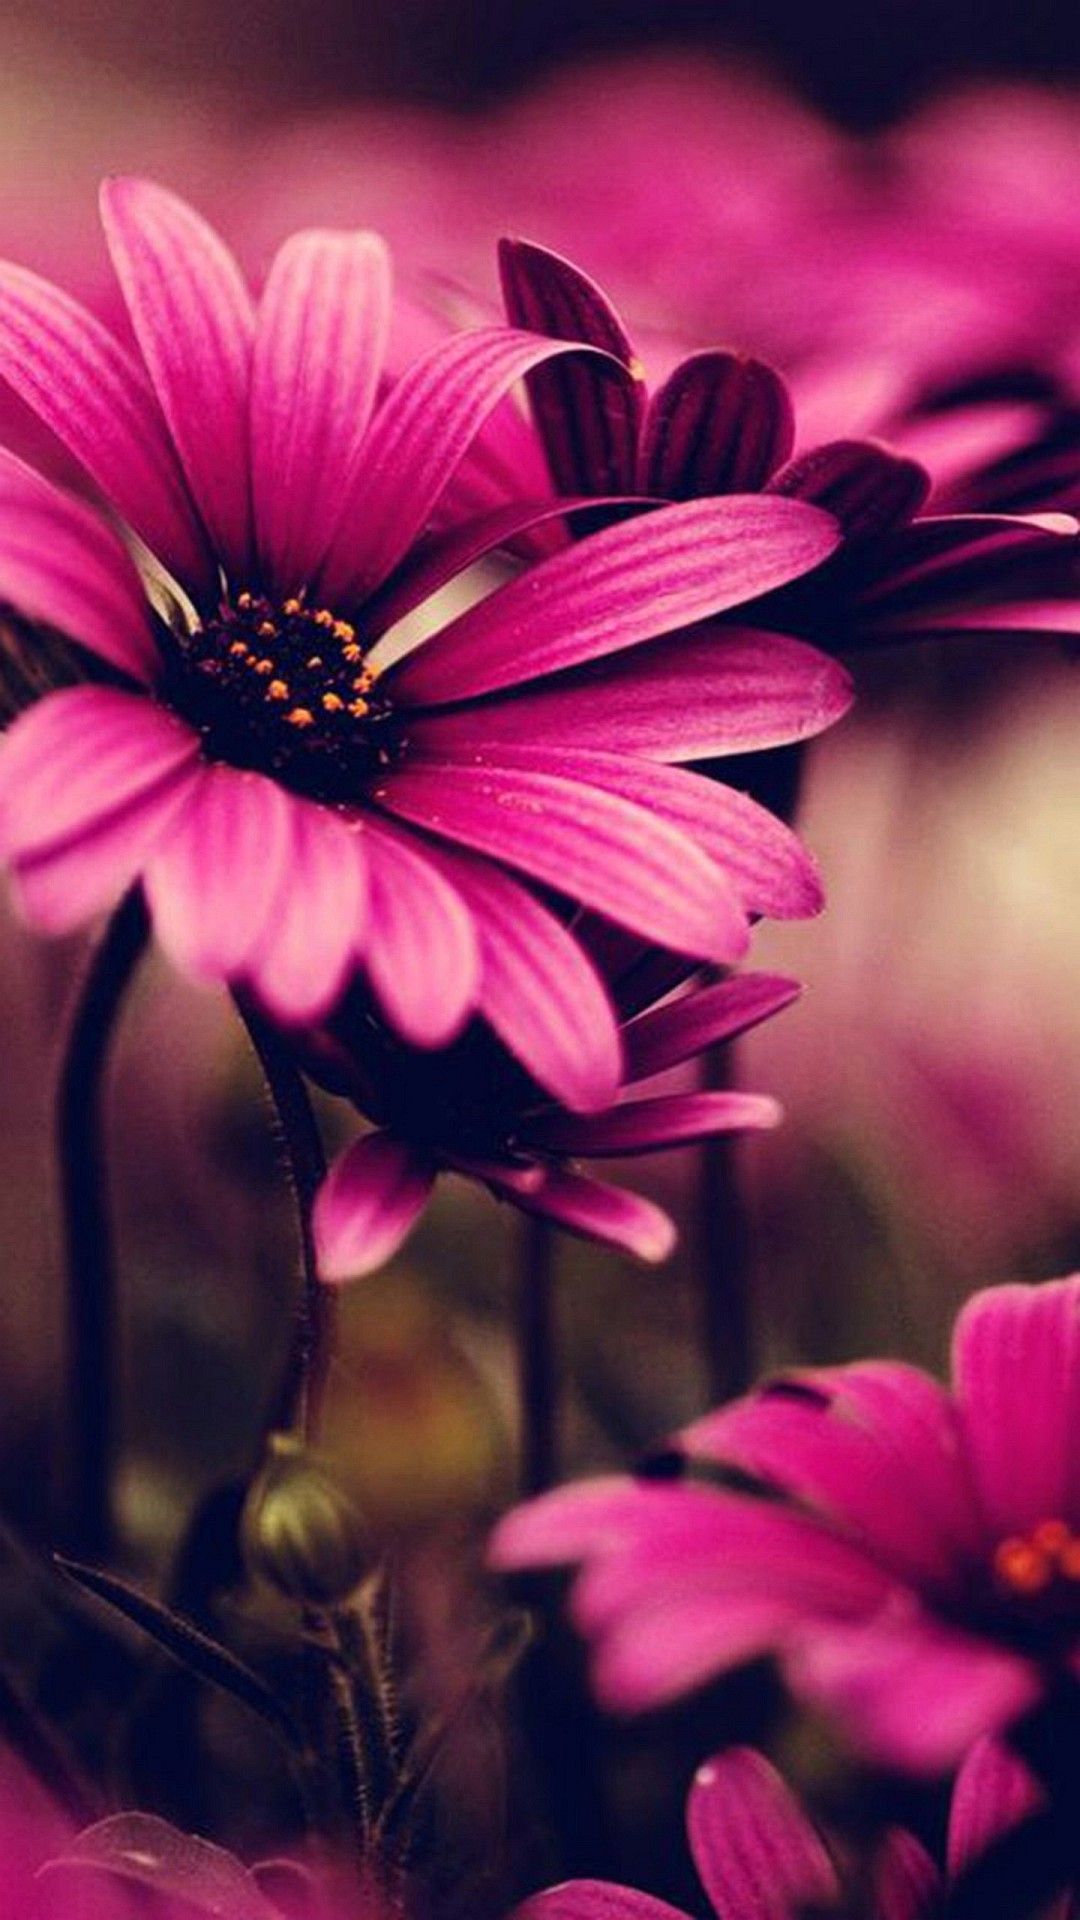 Wallpaper Iphone 6 Plus Pink Flower 5 5 Inches - 1080 x 1920 ...